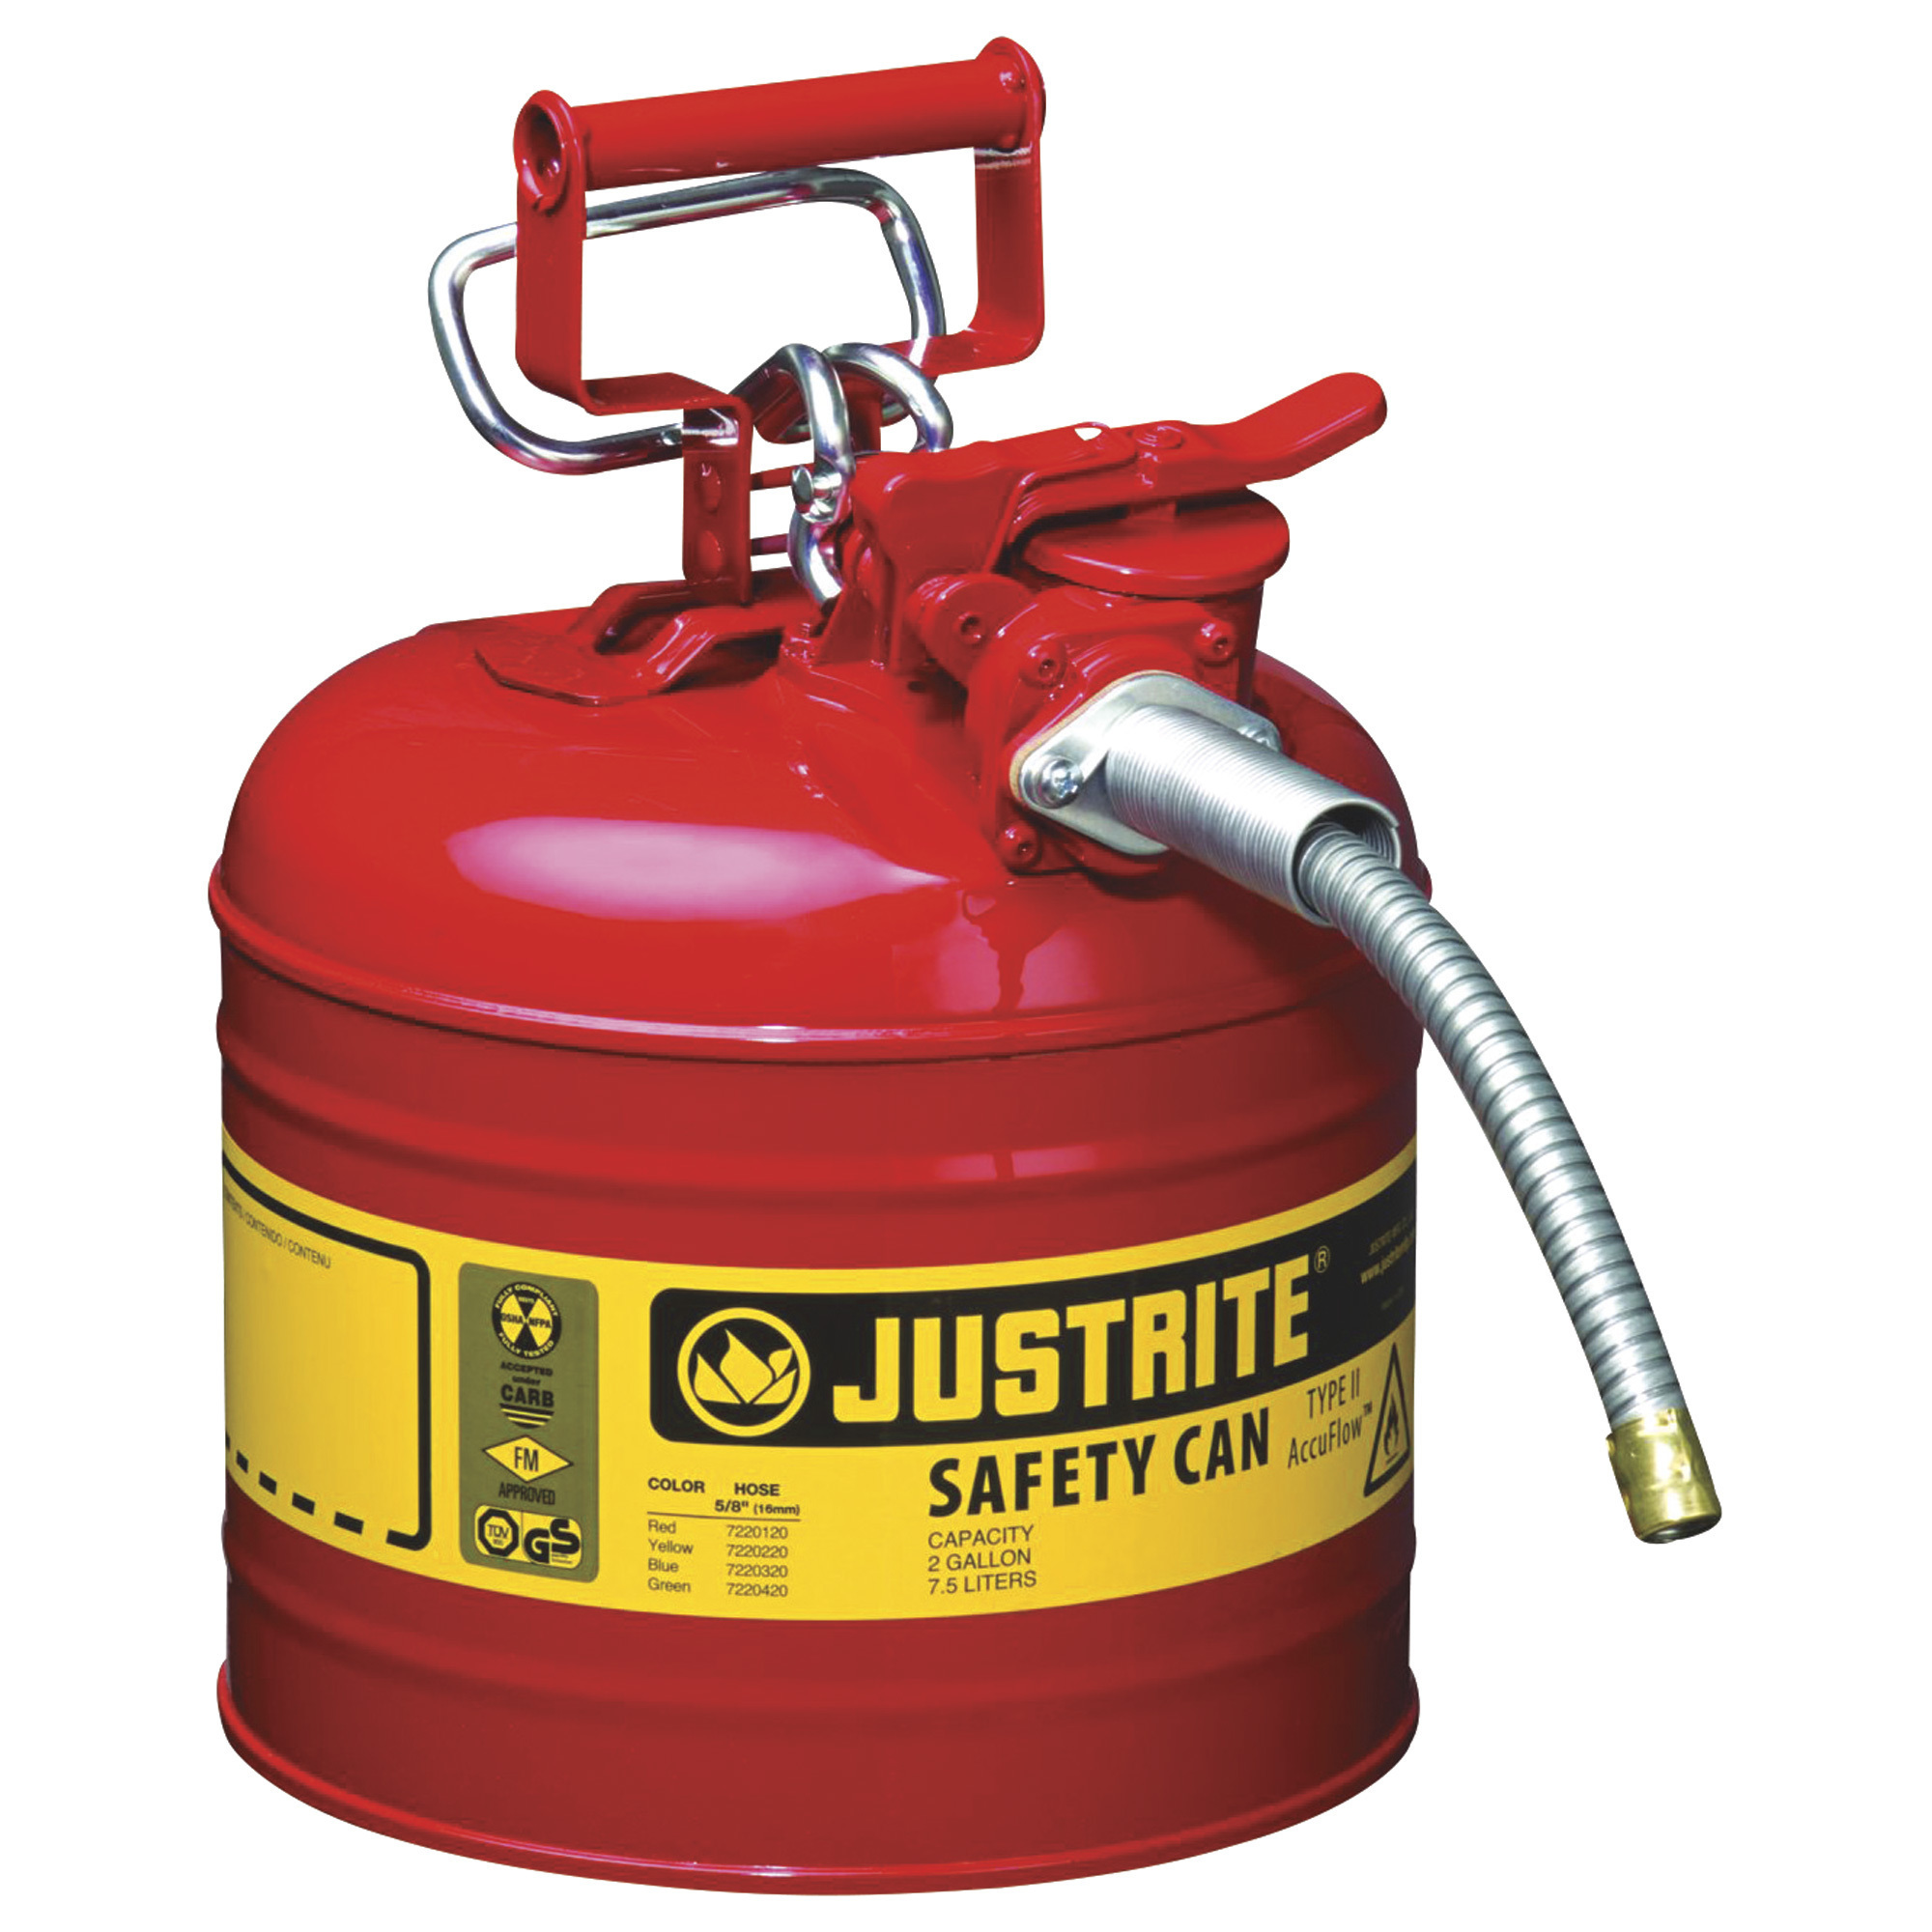 Justrite Safety Gas Can â 2-Gallon, Model 7220120